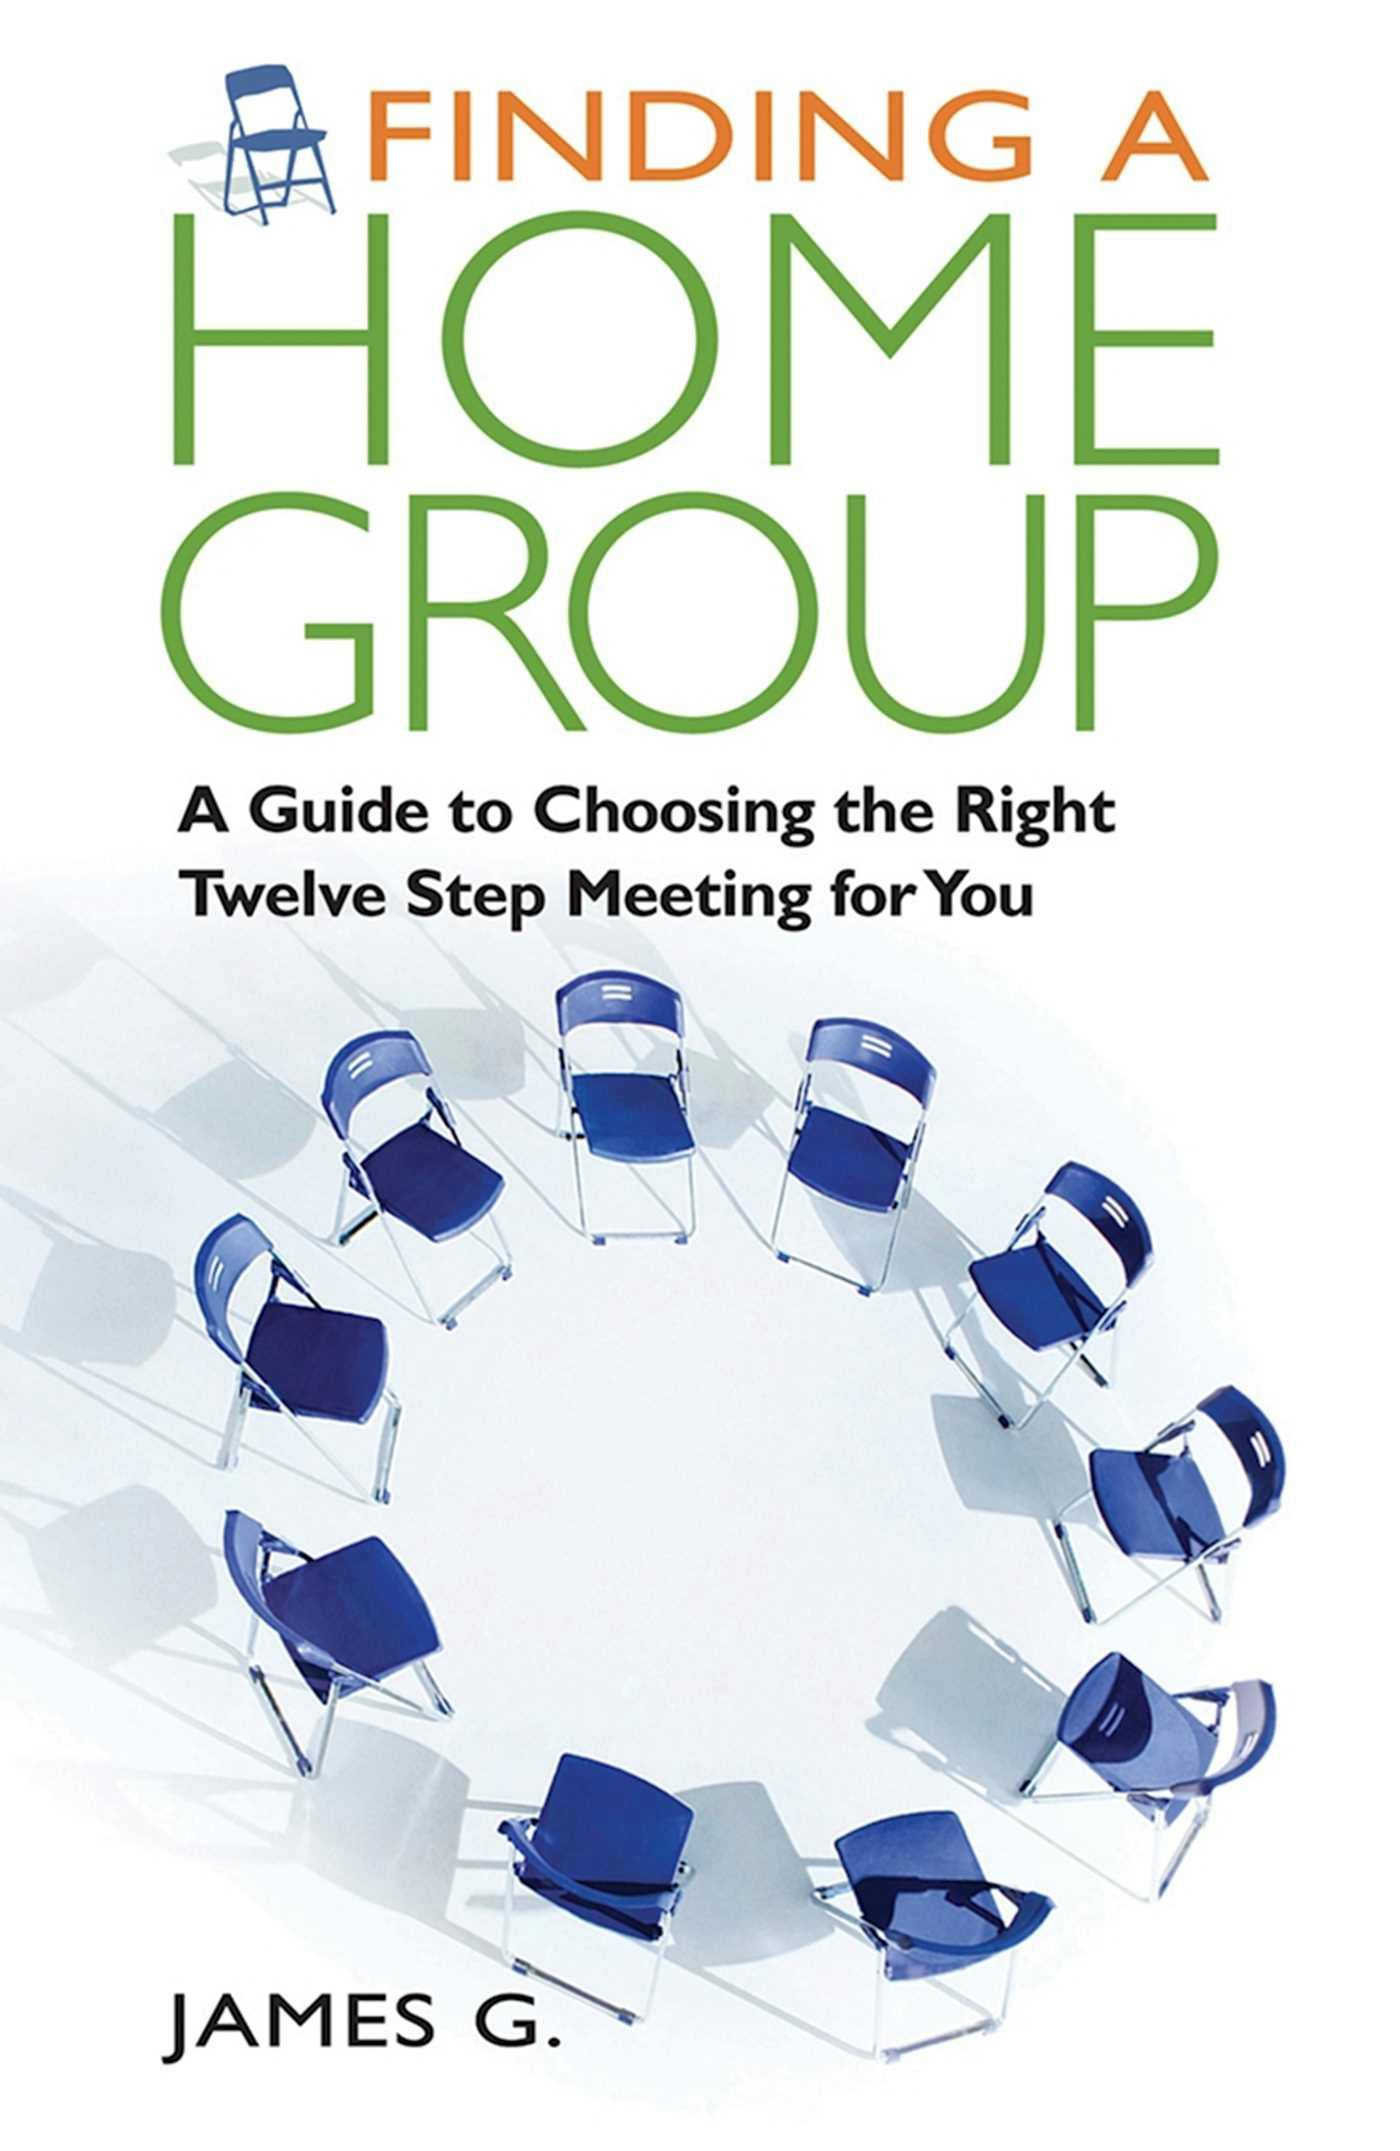 Finding a Home Group: A Guide to Choosing the Right Twelve Step Meeting for You - James G.